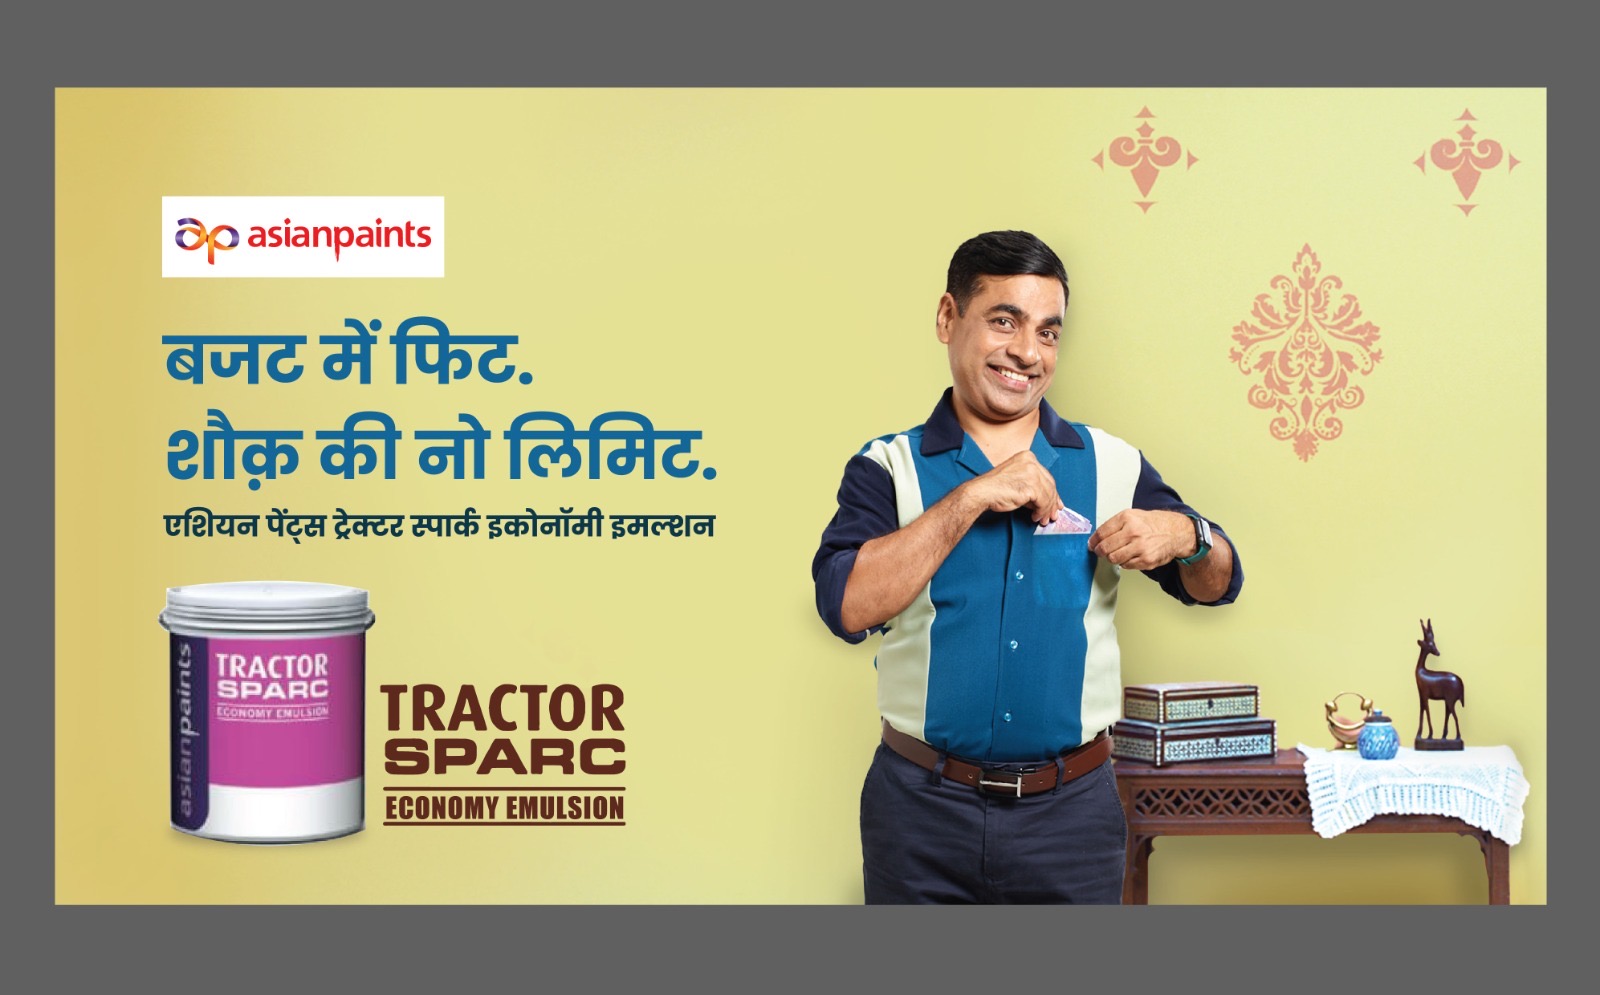 You are currently viewing Asian Paints promotes ‘Shauq Ki No Limit’ in their new campaign for ‘Budget Mein Fit’ Tractor and Ace Sparc Emulsions